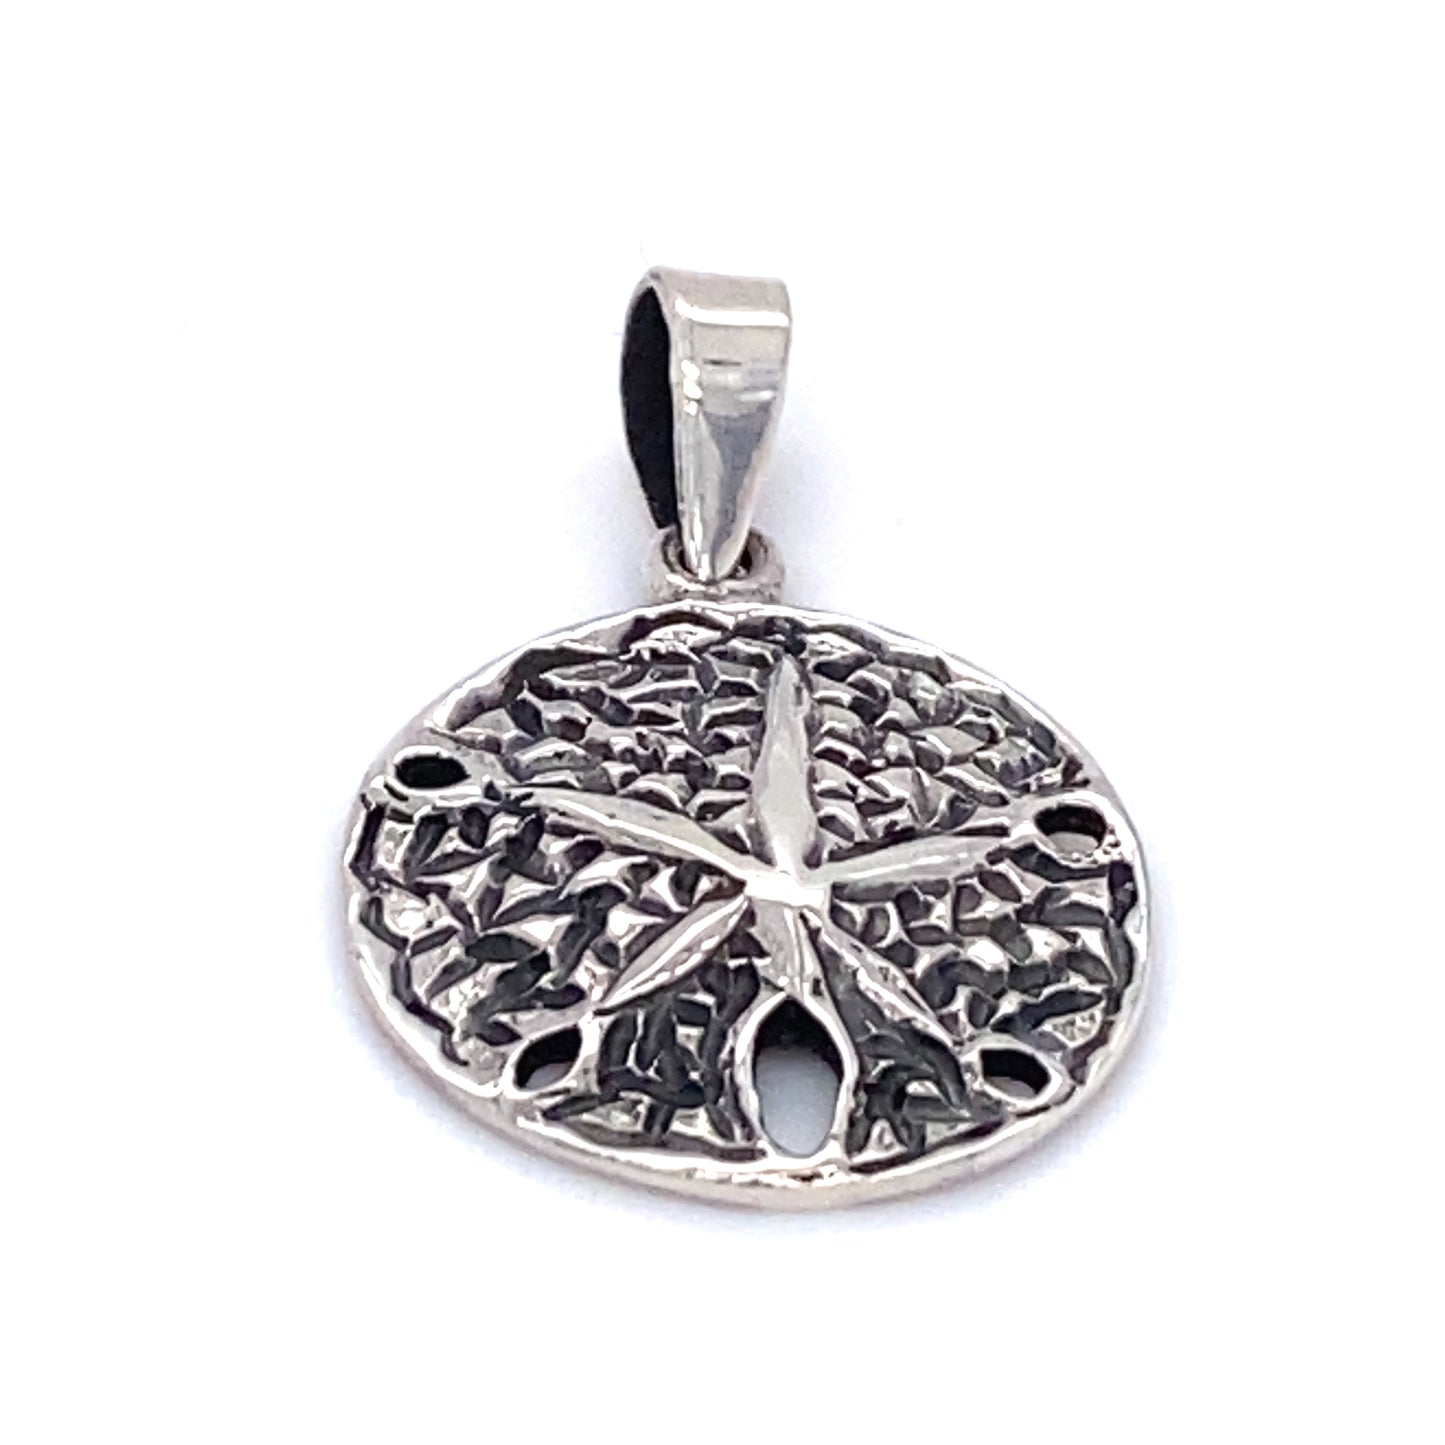 A beach lover's dream pendant featuring a stunning Sand Dollar Pendant with Textured Finish crafted from .925 Sterling Silver, beautifully showcased on a pristine white background, brought to you by Super Silver.